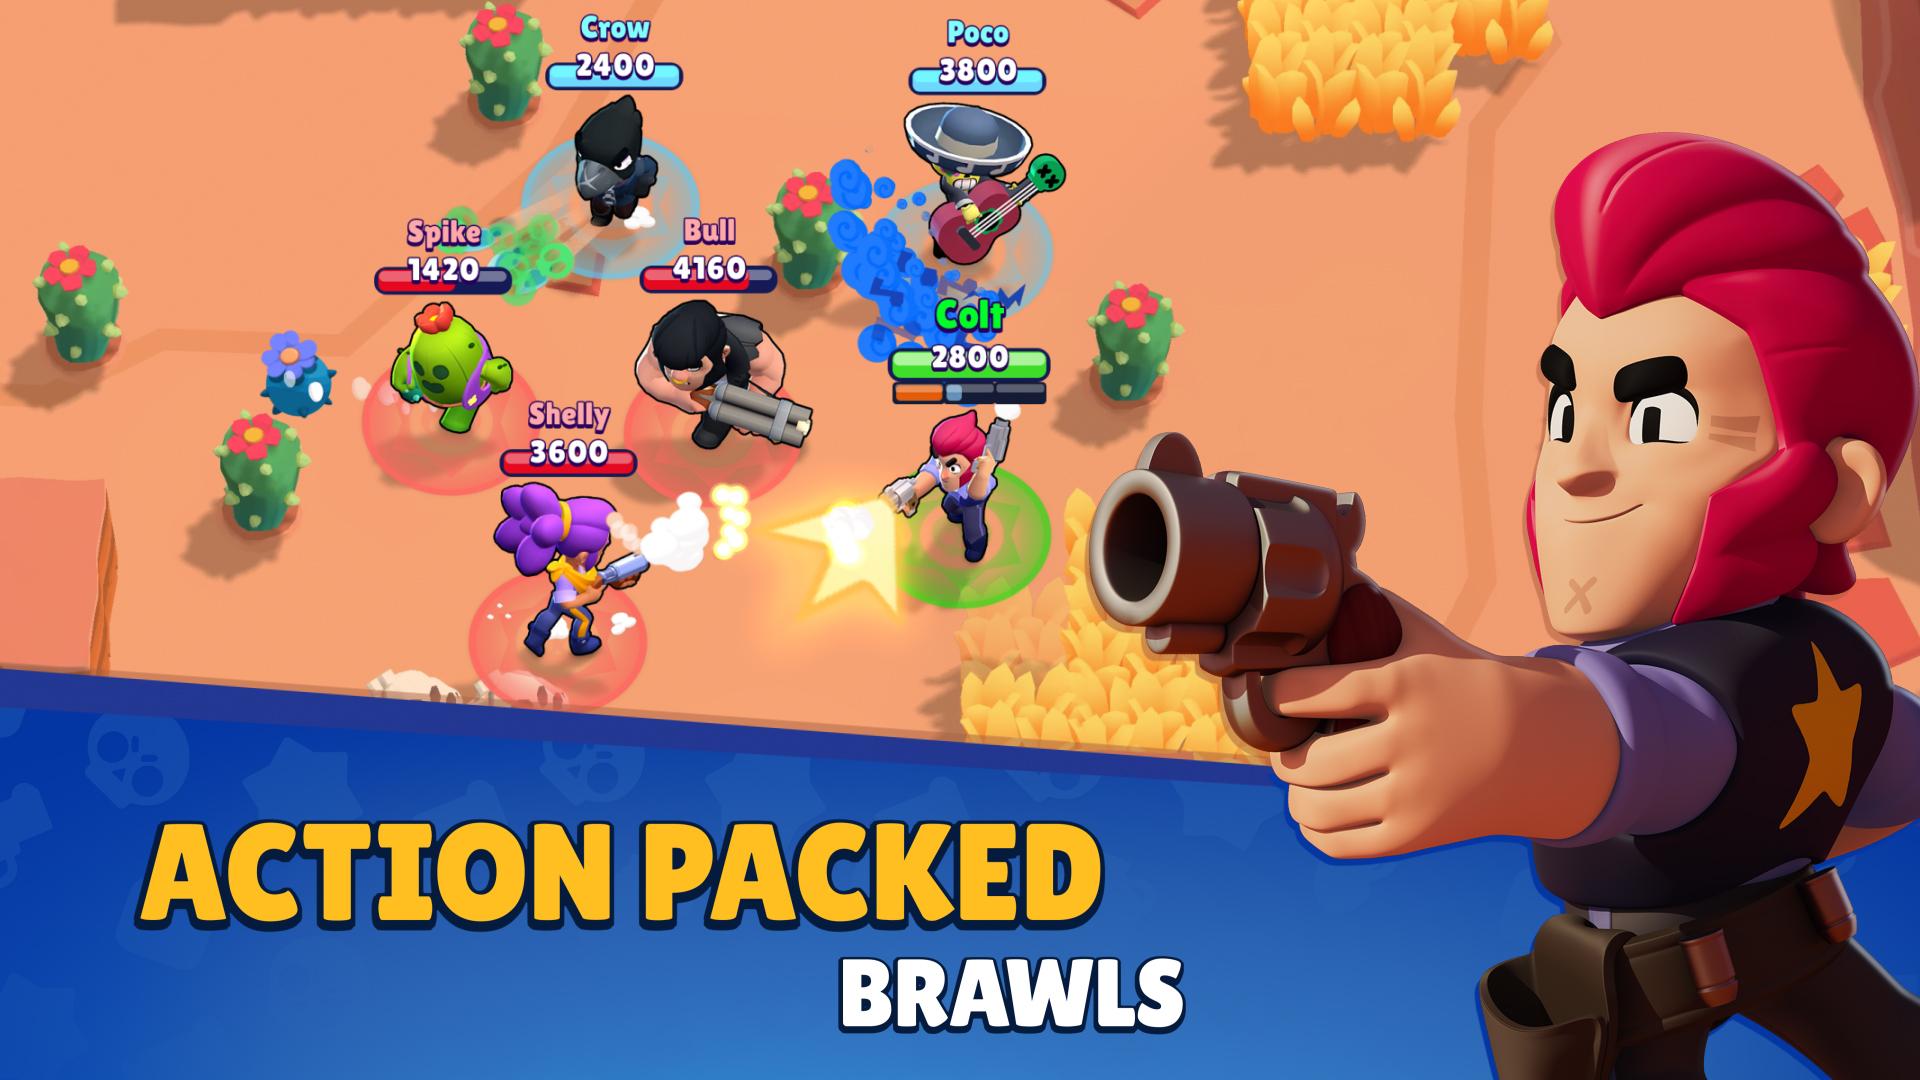 Brawl Stars How To Get The Most Bang For Your Gem Buck Premium Currency Guide Gameranx - brawl stars spend gems on token doublers or skins